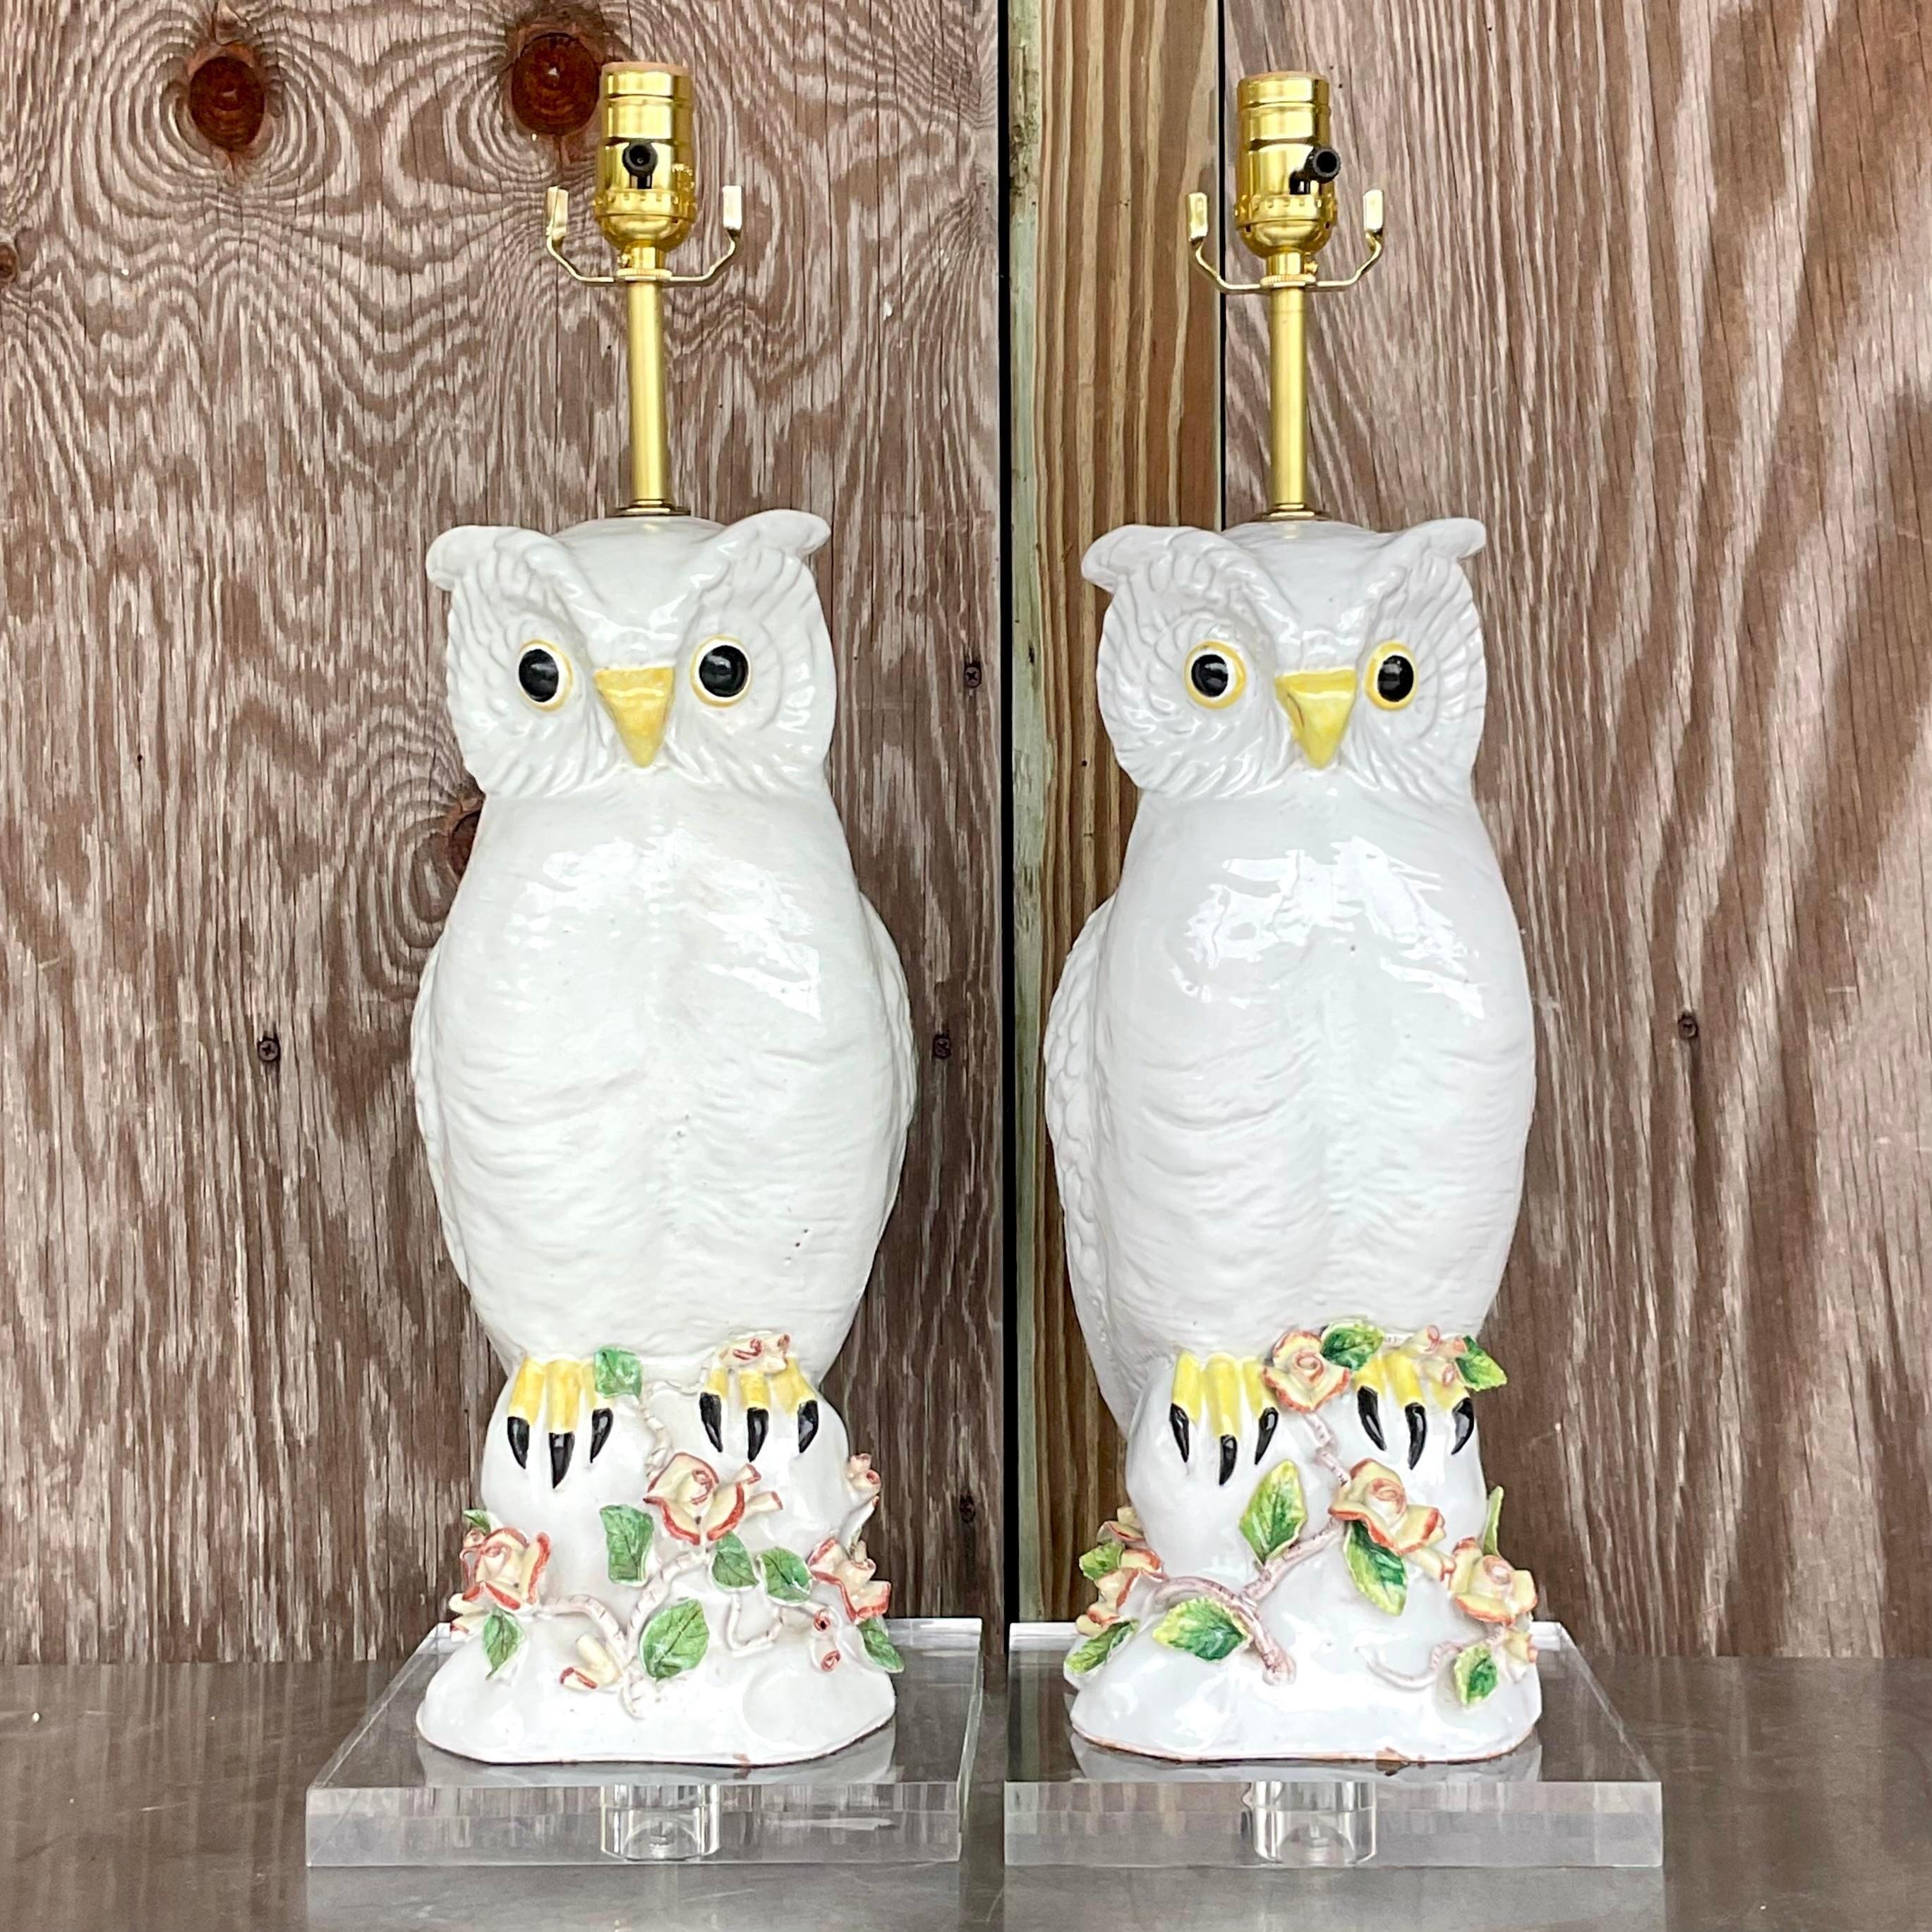 A fabulous pair of vintage Regency table lamps. A handsome pair of terra cotta owls with hand painted detail. Fully restored with all new wiring, hardware and lucite plinths. Acquired from a Palm Beach estate.